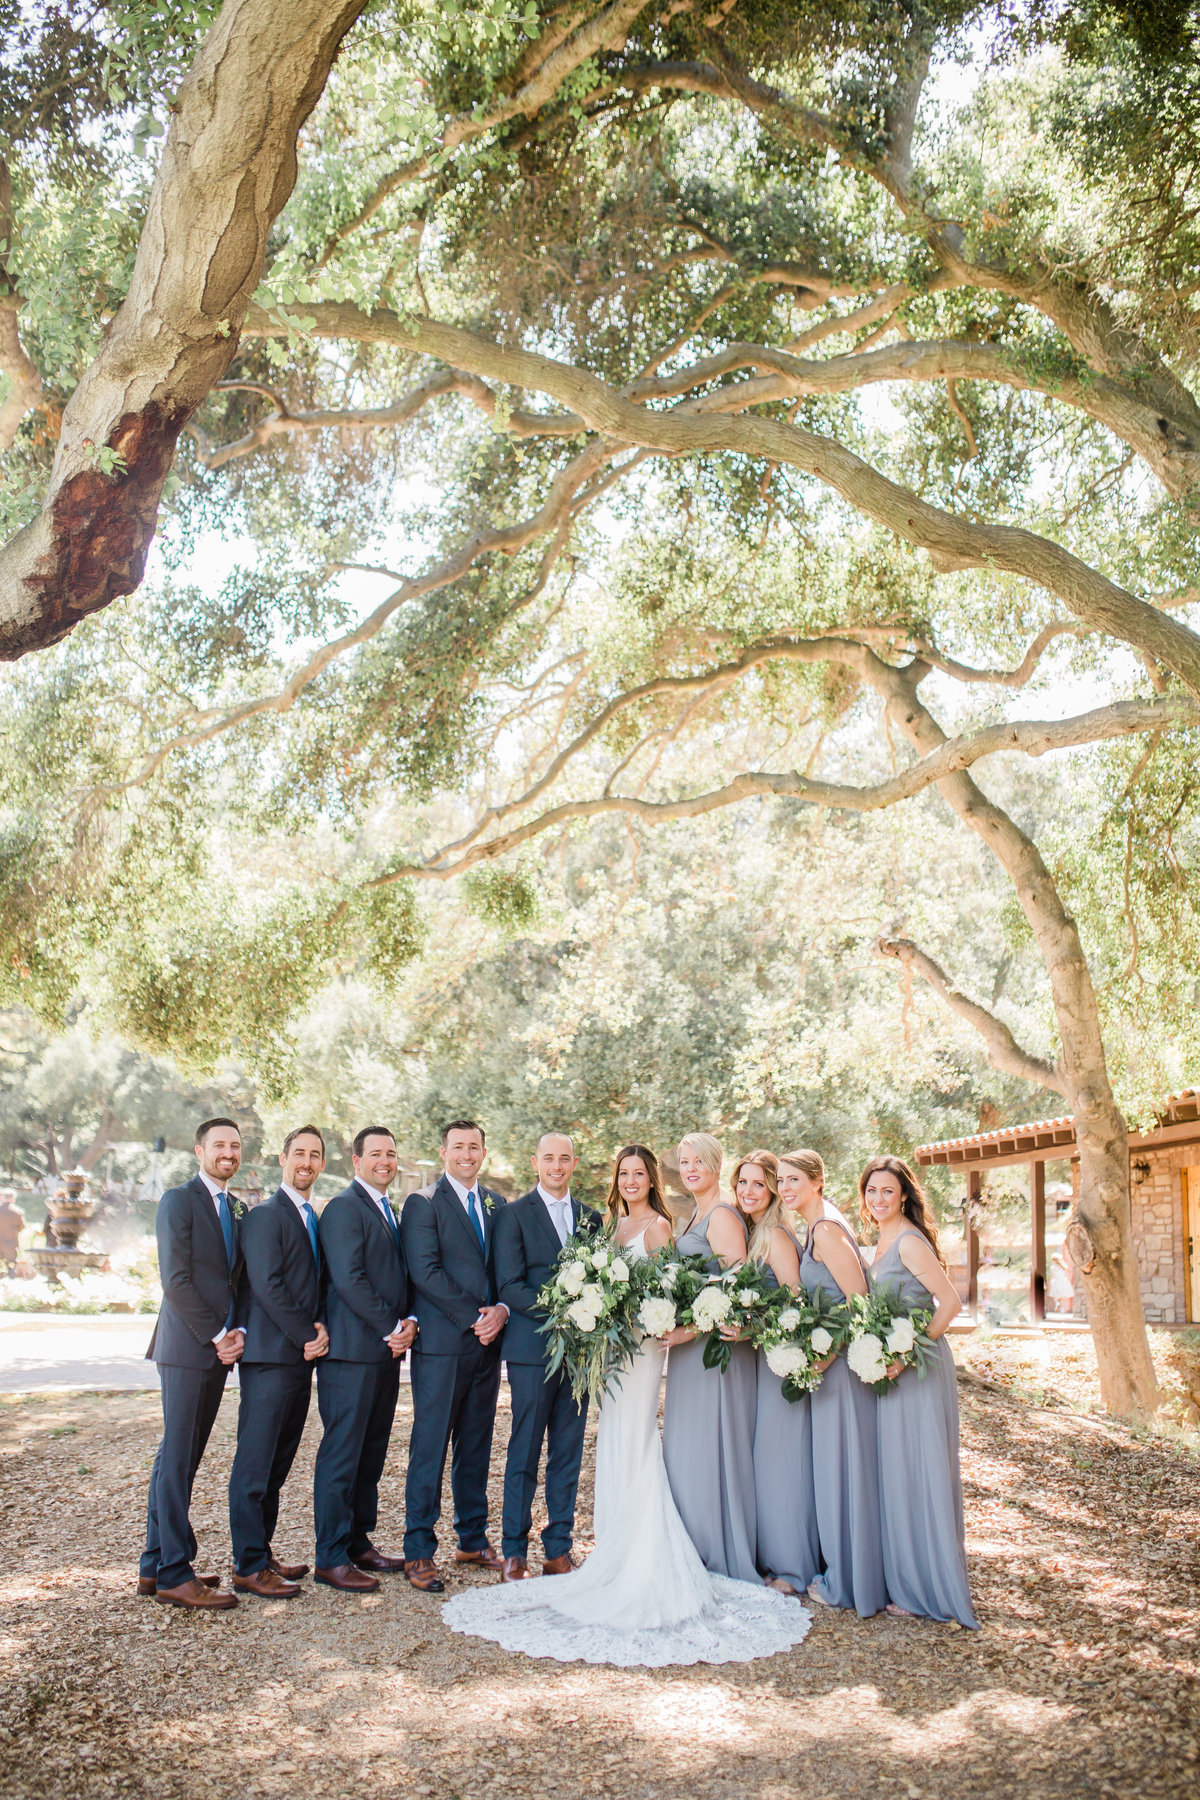 Paige & Thomas are Married| Circle Oak Ranch Wedding | Katie Schoepflin Photography153